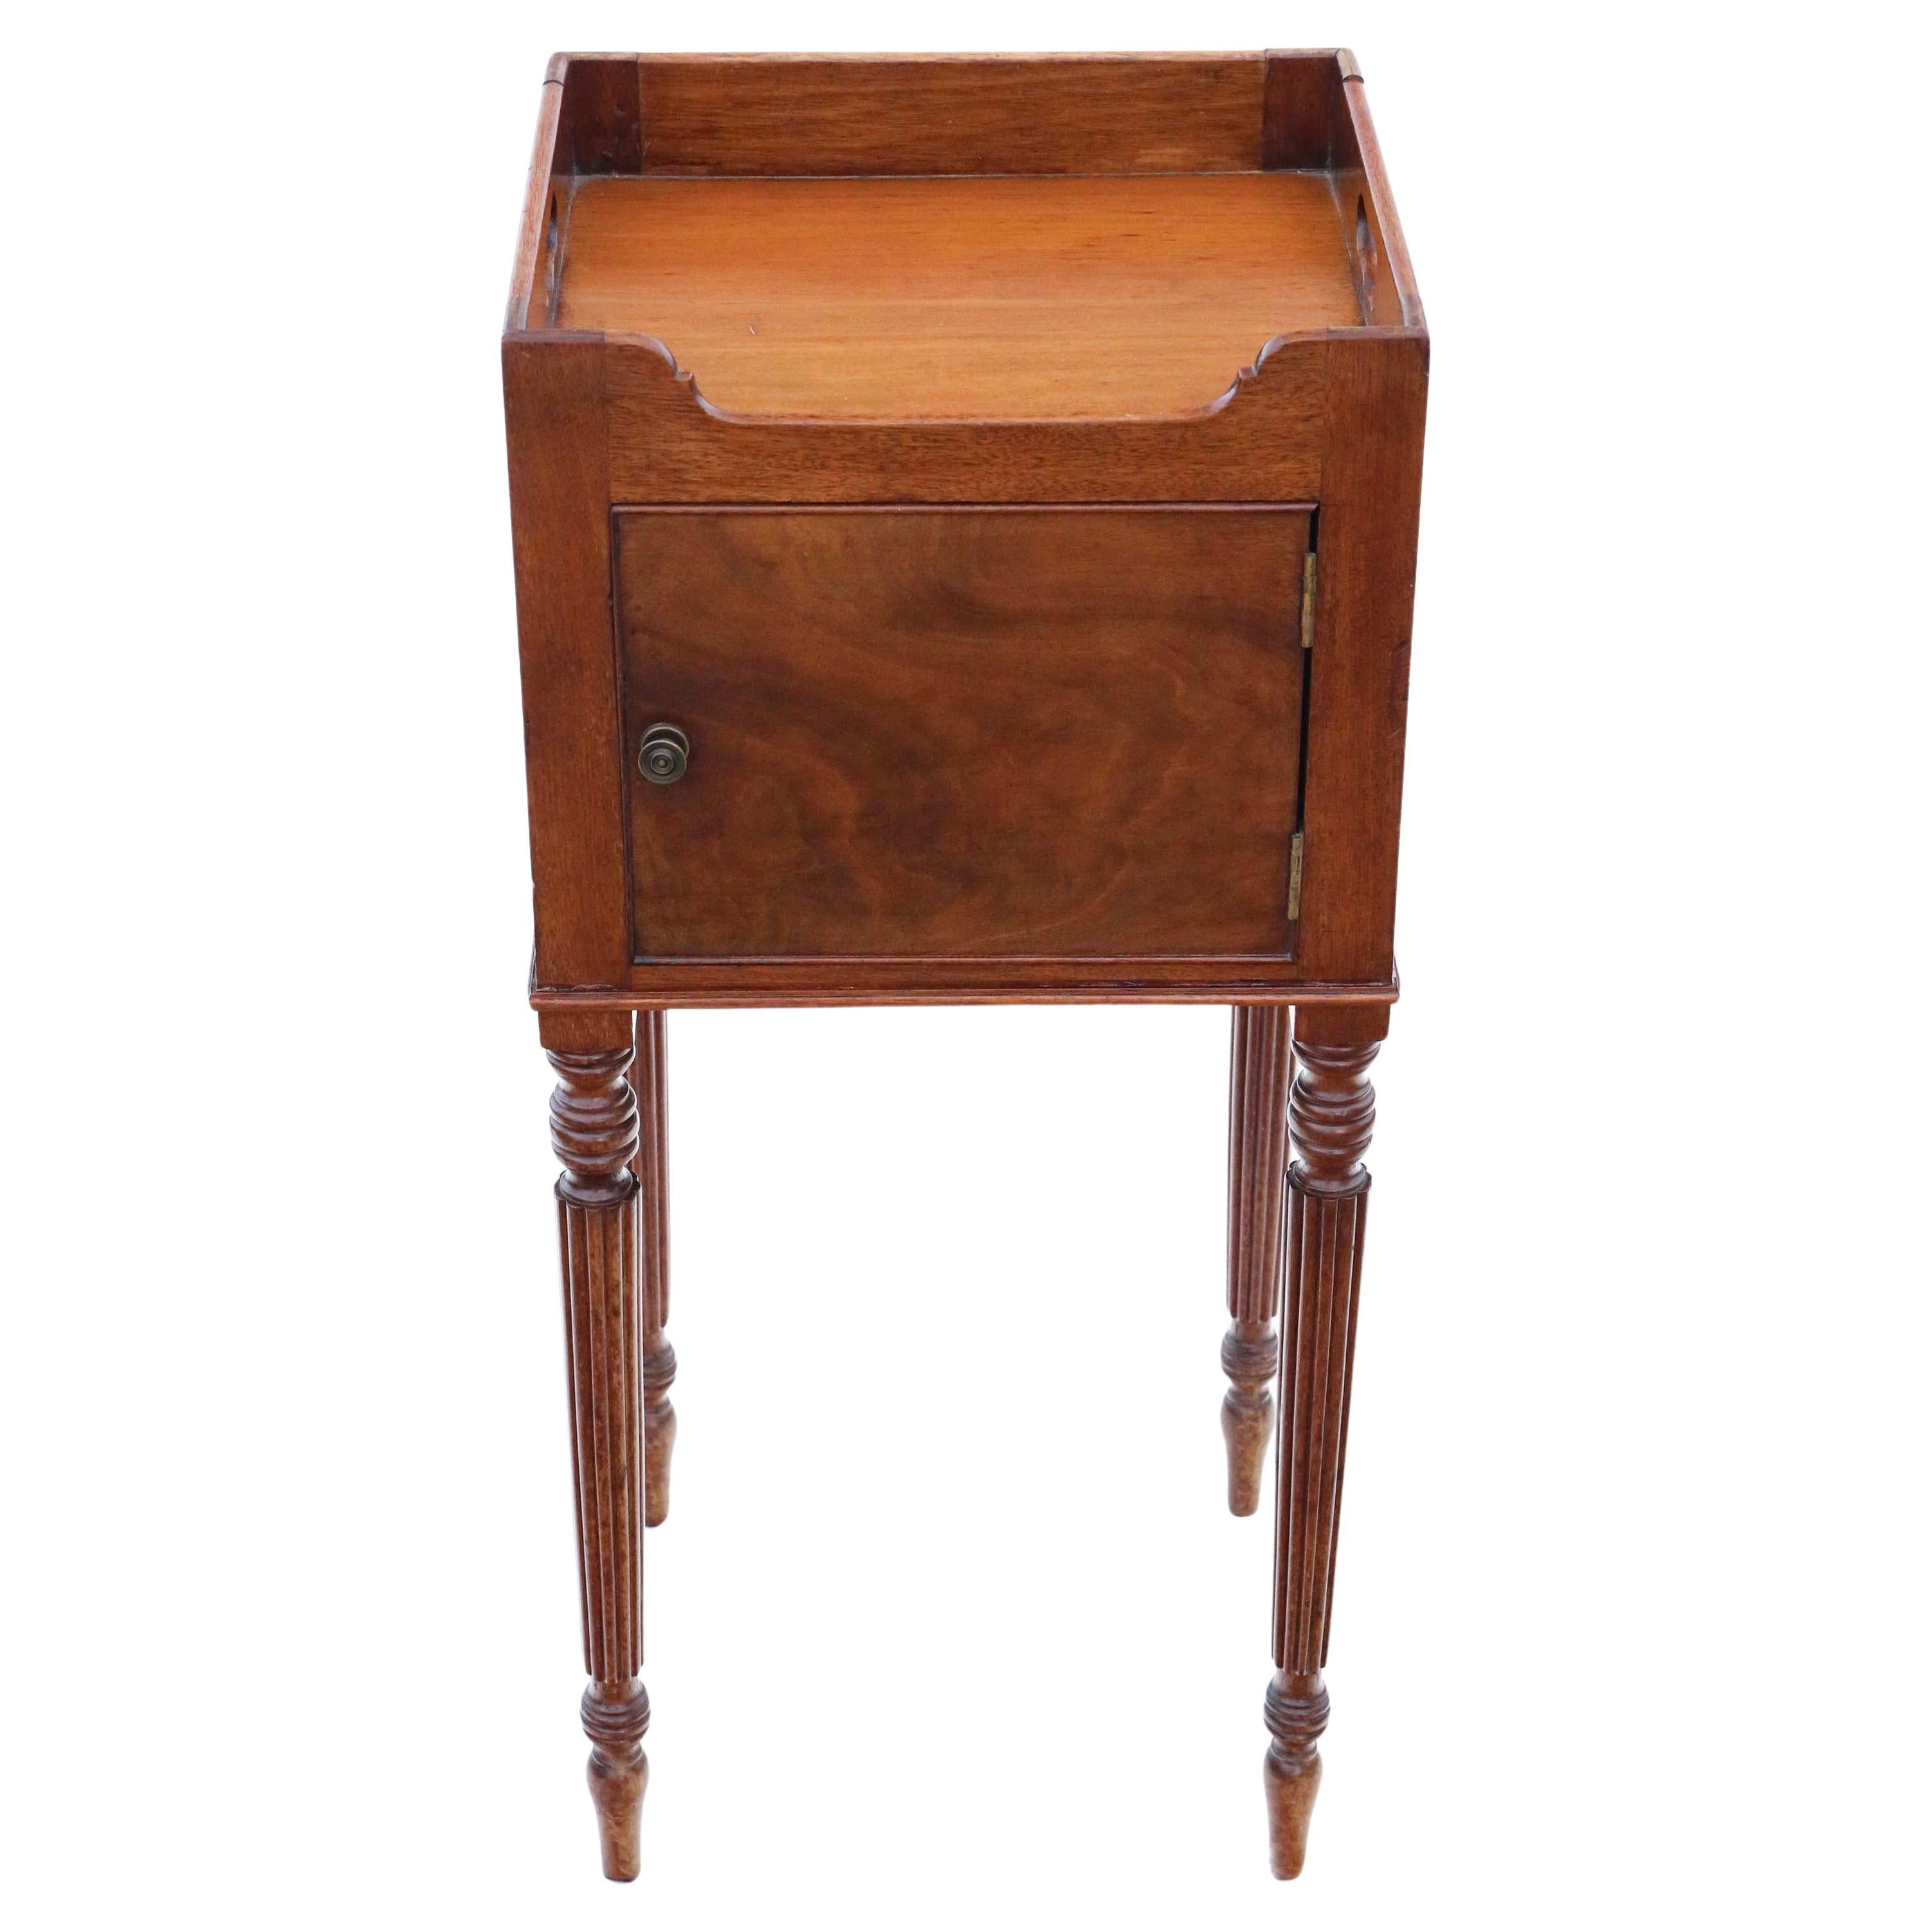 Antique quality 19th Century nightstand mahogany tray top washstand bedside tabl